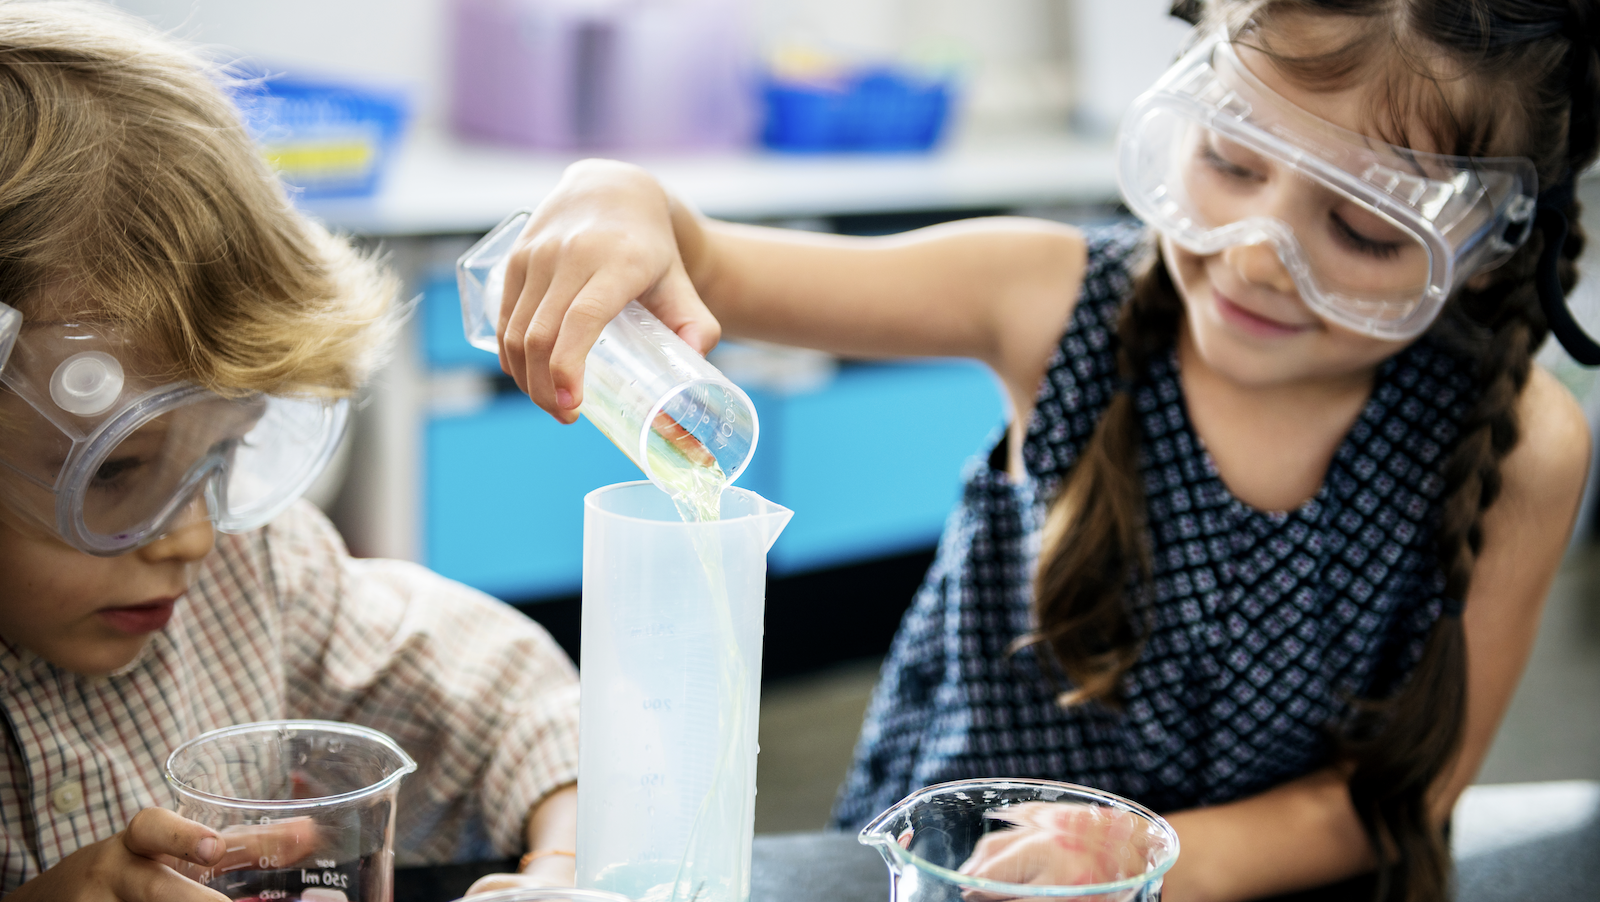 Boy and girl pouring a liquid into a beaker